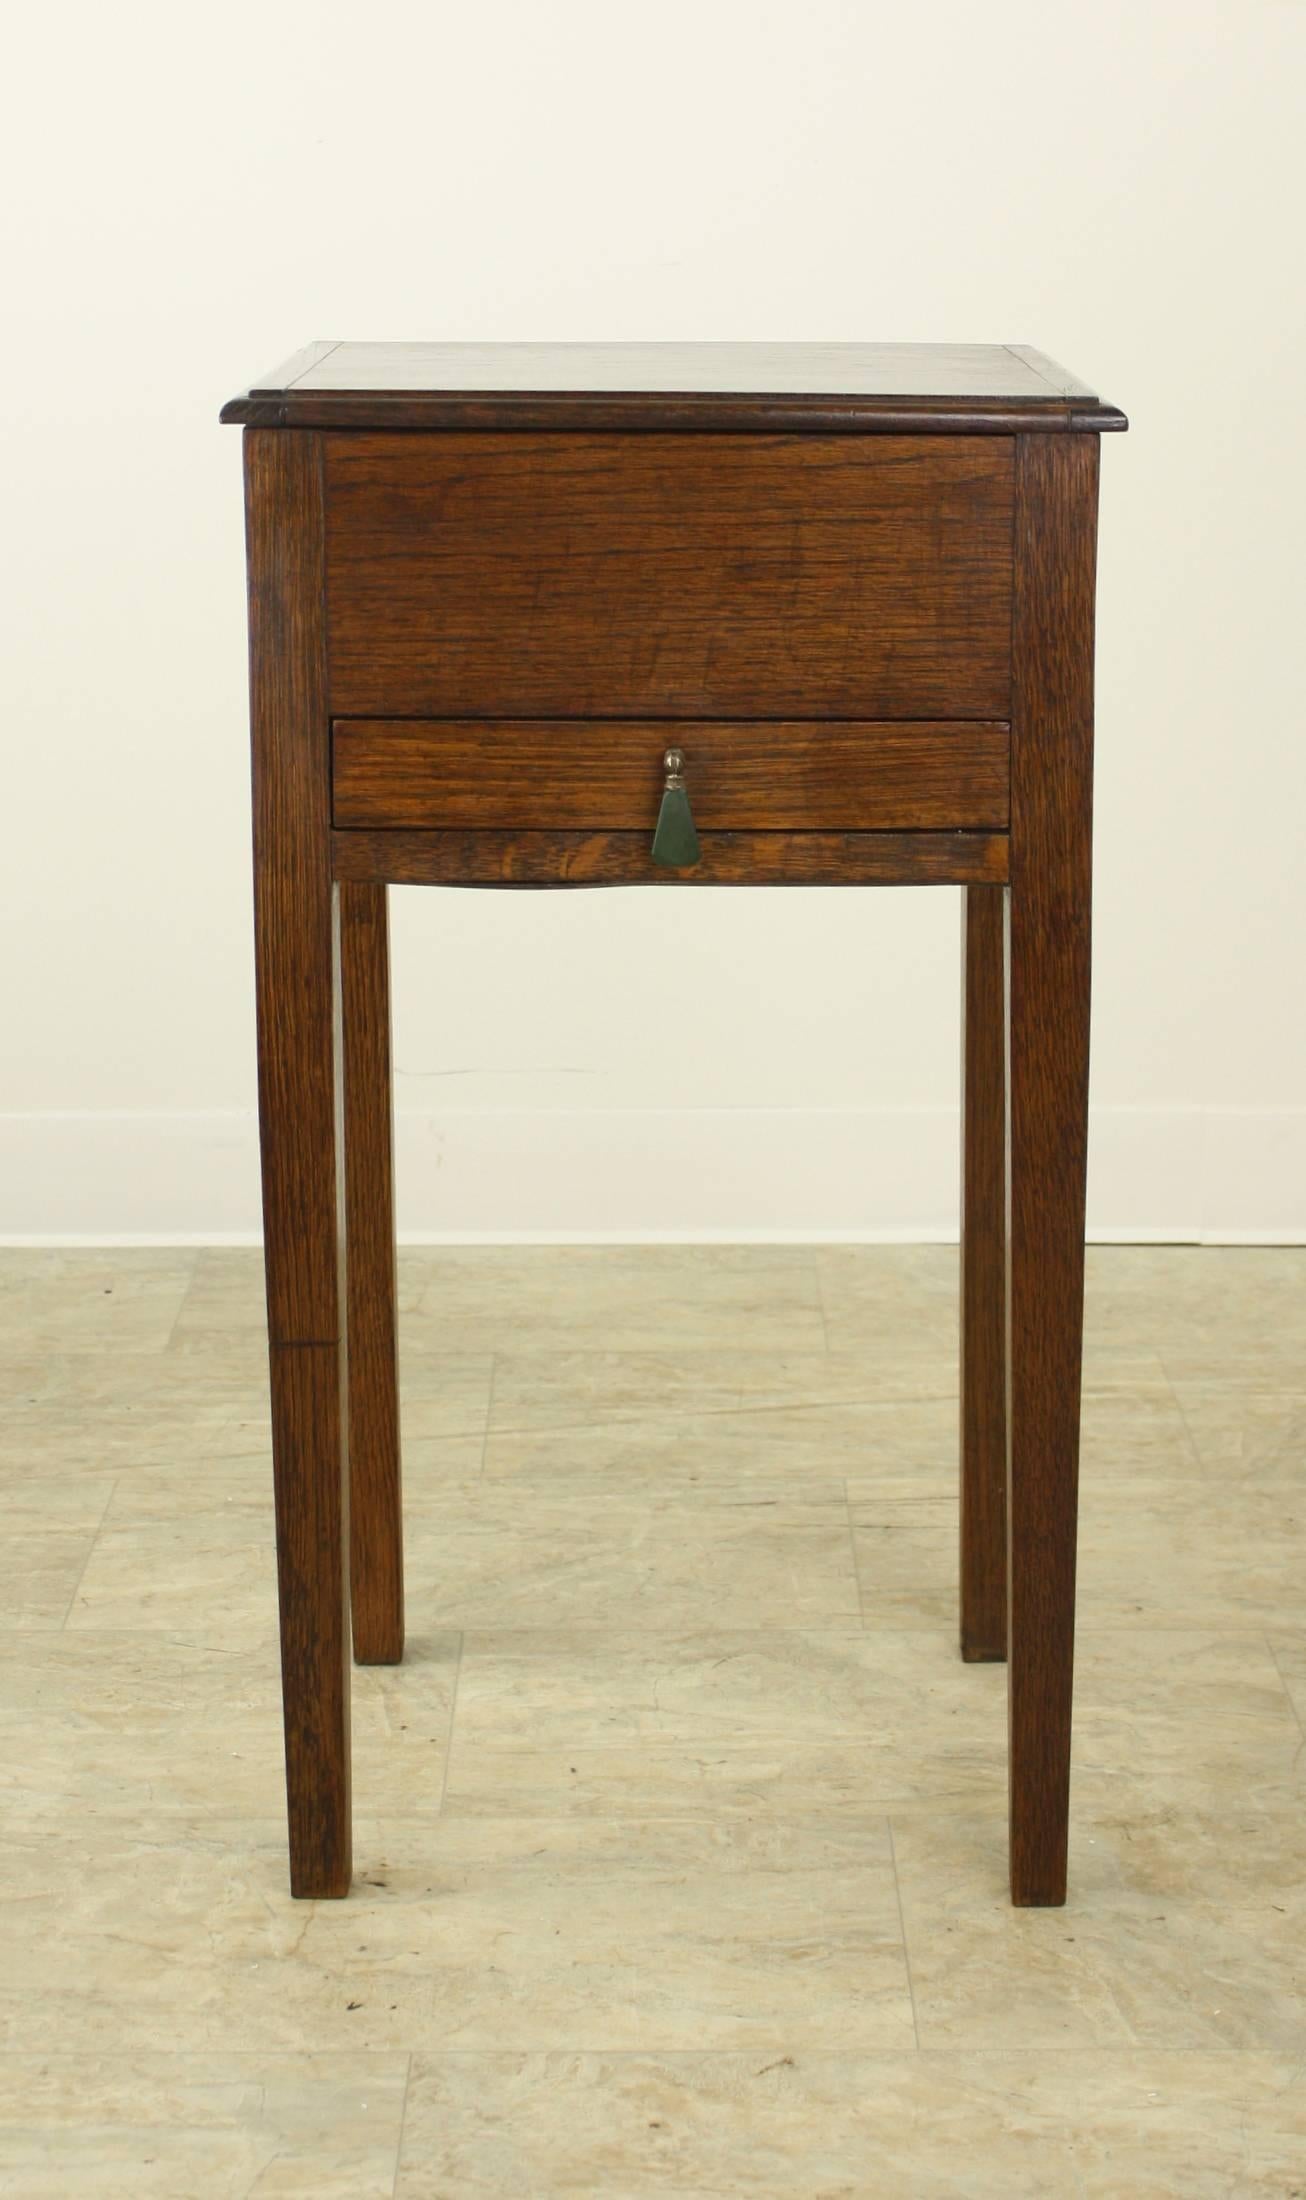 A small oak sewing box on long tapered legs makes a charming side table! Wonderful deep color and patina. The top flips open to a deep storage bin, and there is a small sliding drawer with a decorative green teardrop pull. Perfect for as a lamp or